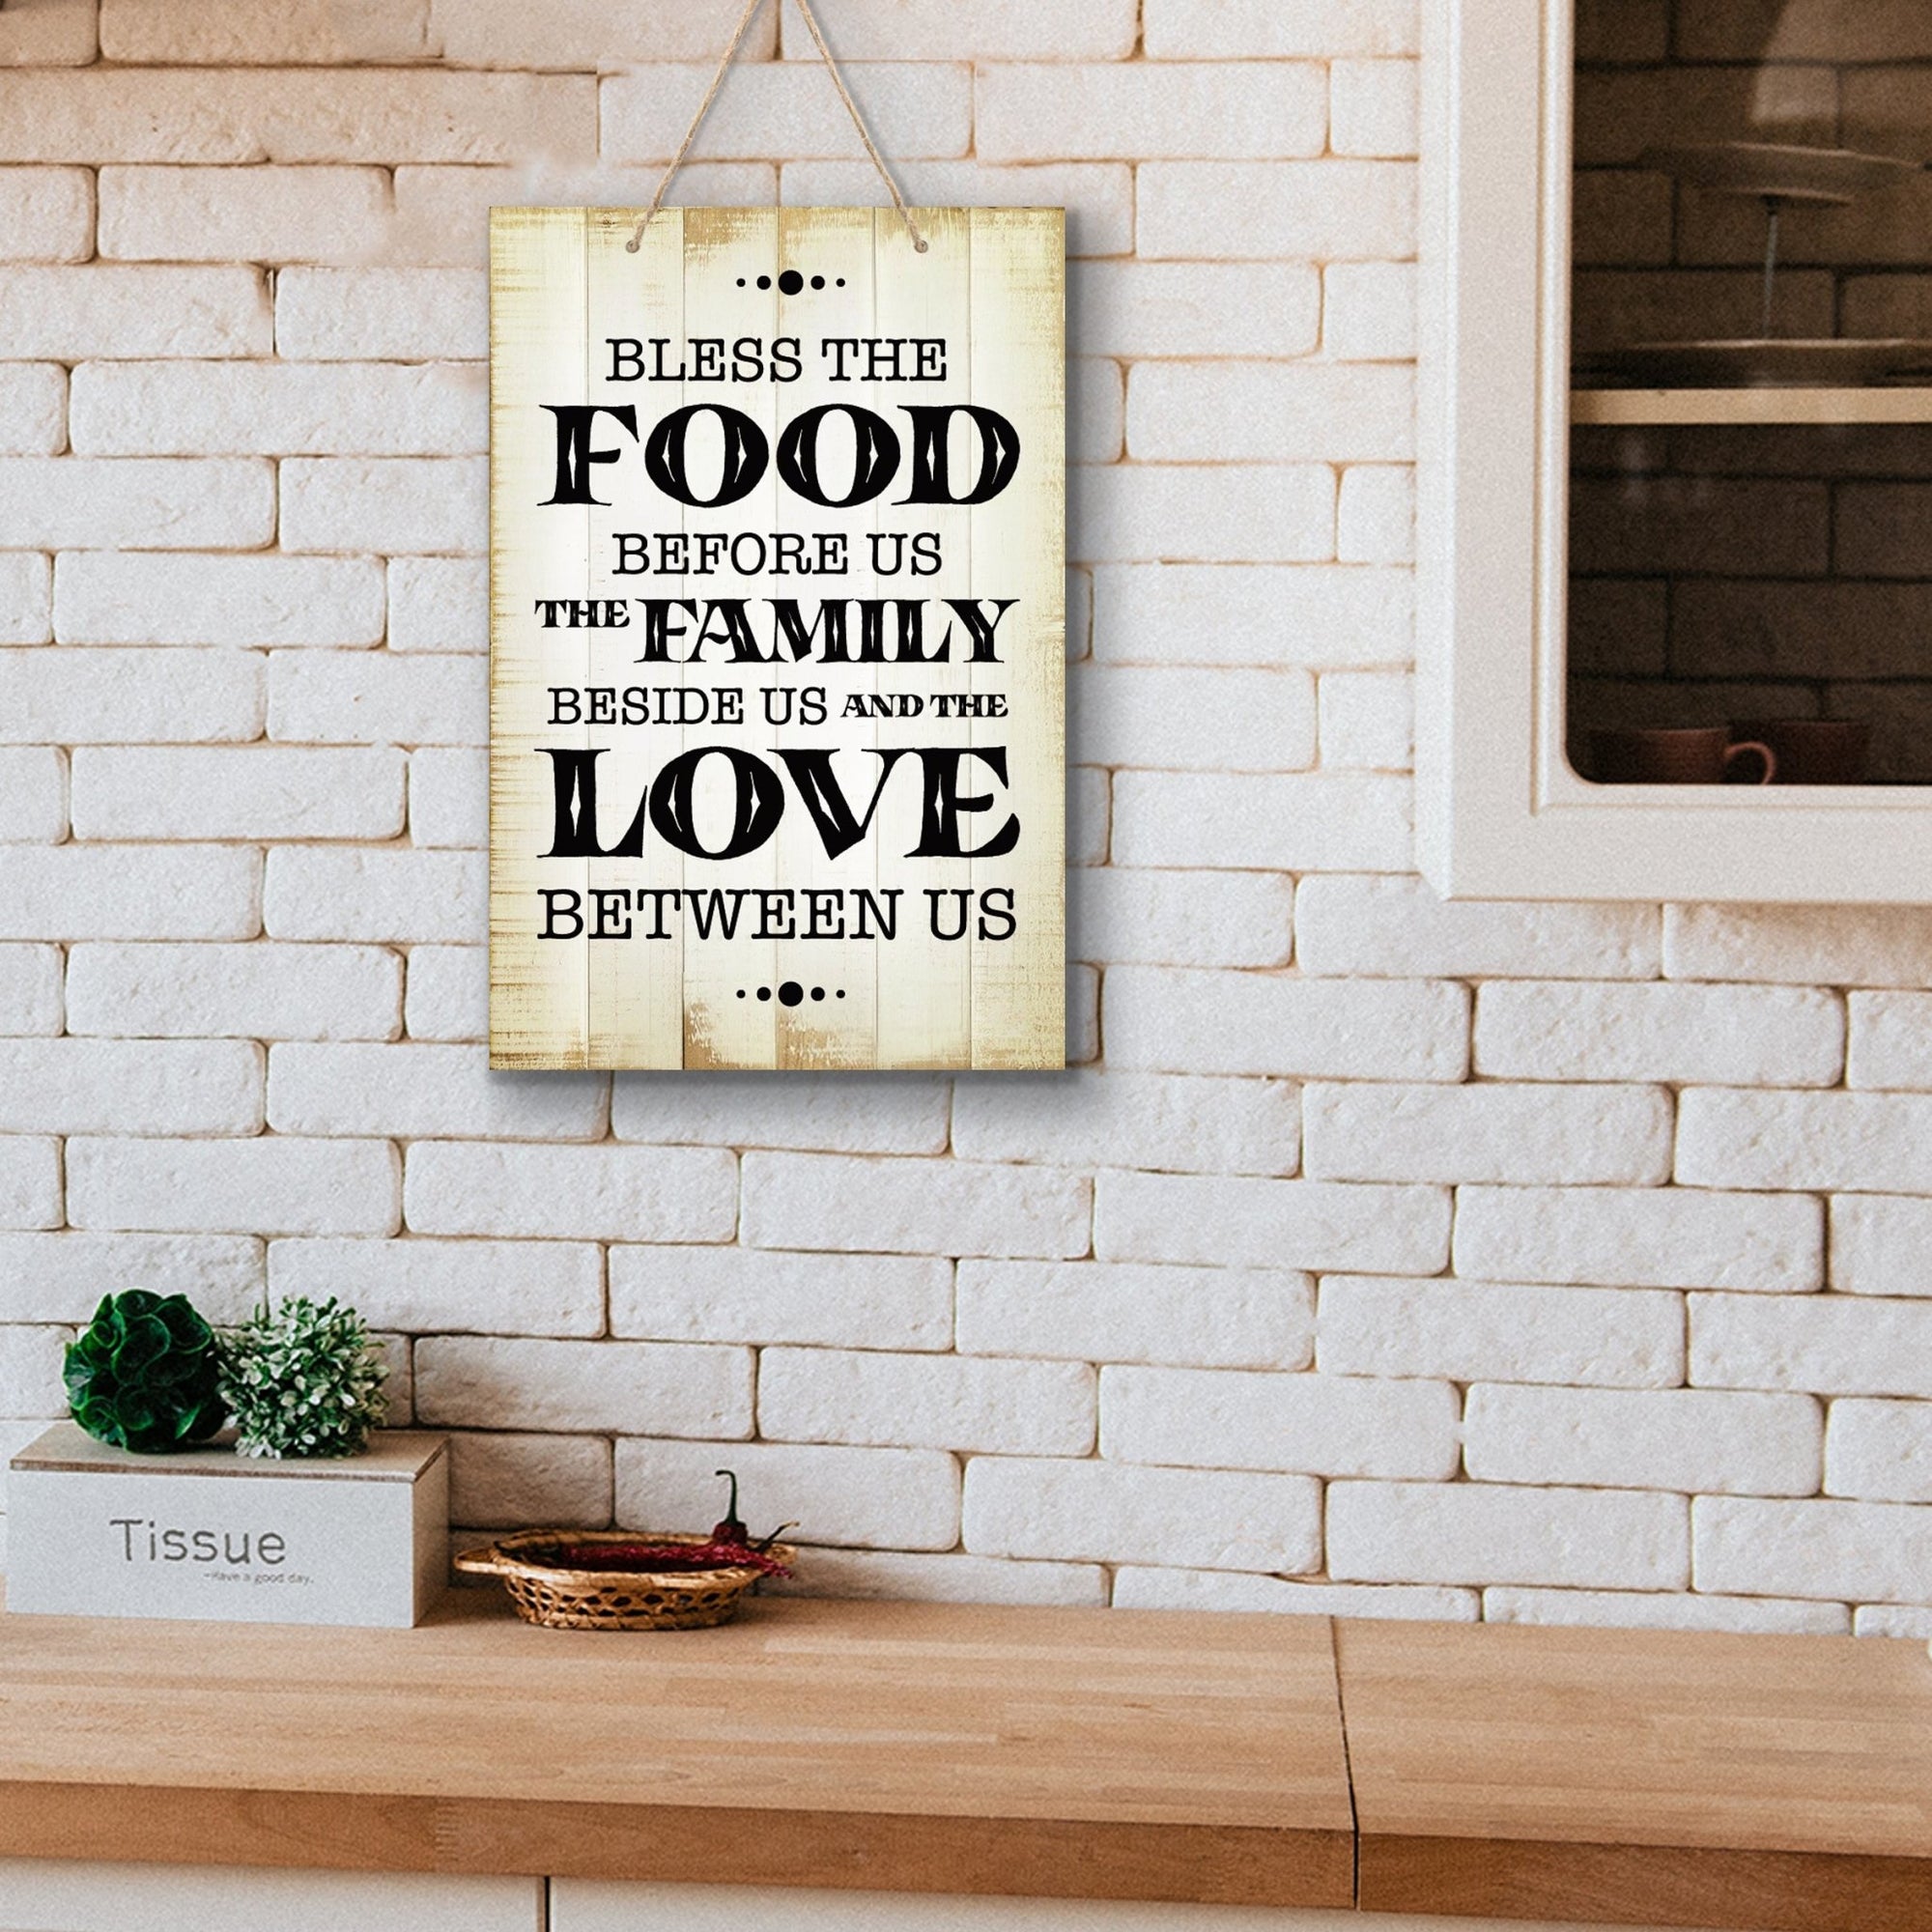 Inspirational Rustic Wooden Wall Hanging Rope Sign Kitchen Décor - Bless The Food Before Us